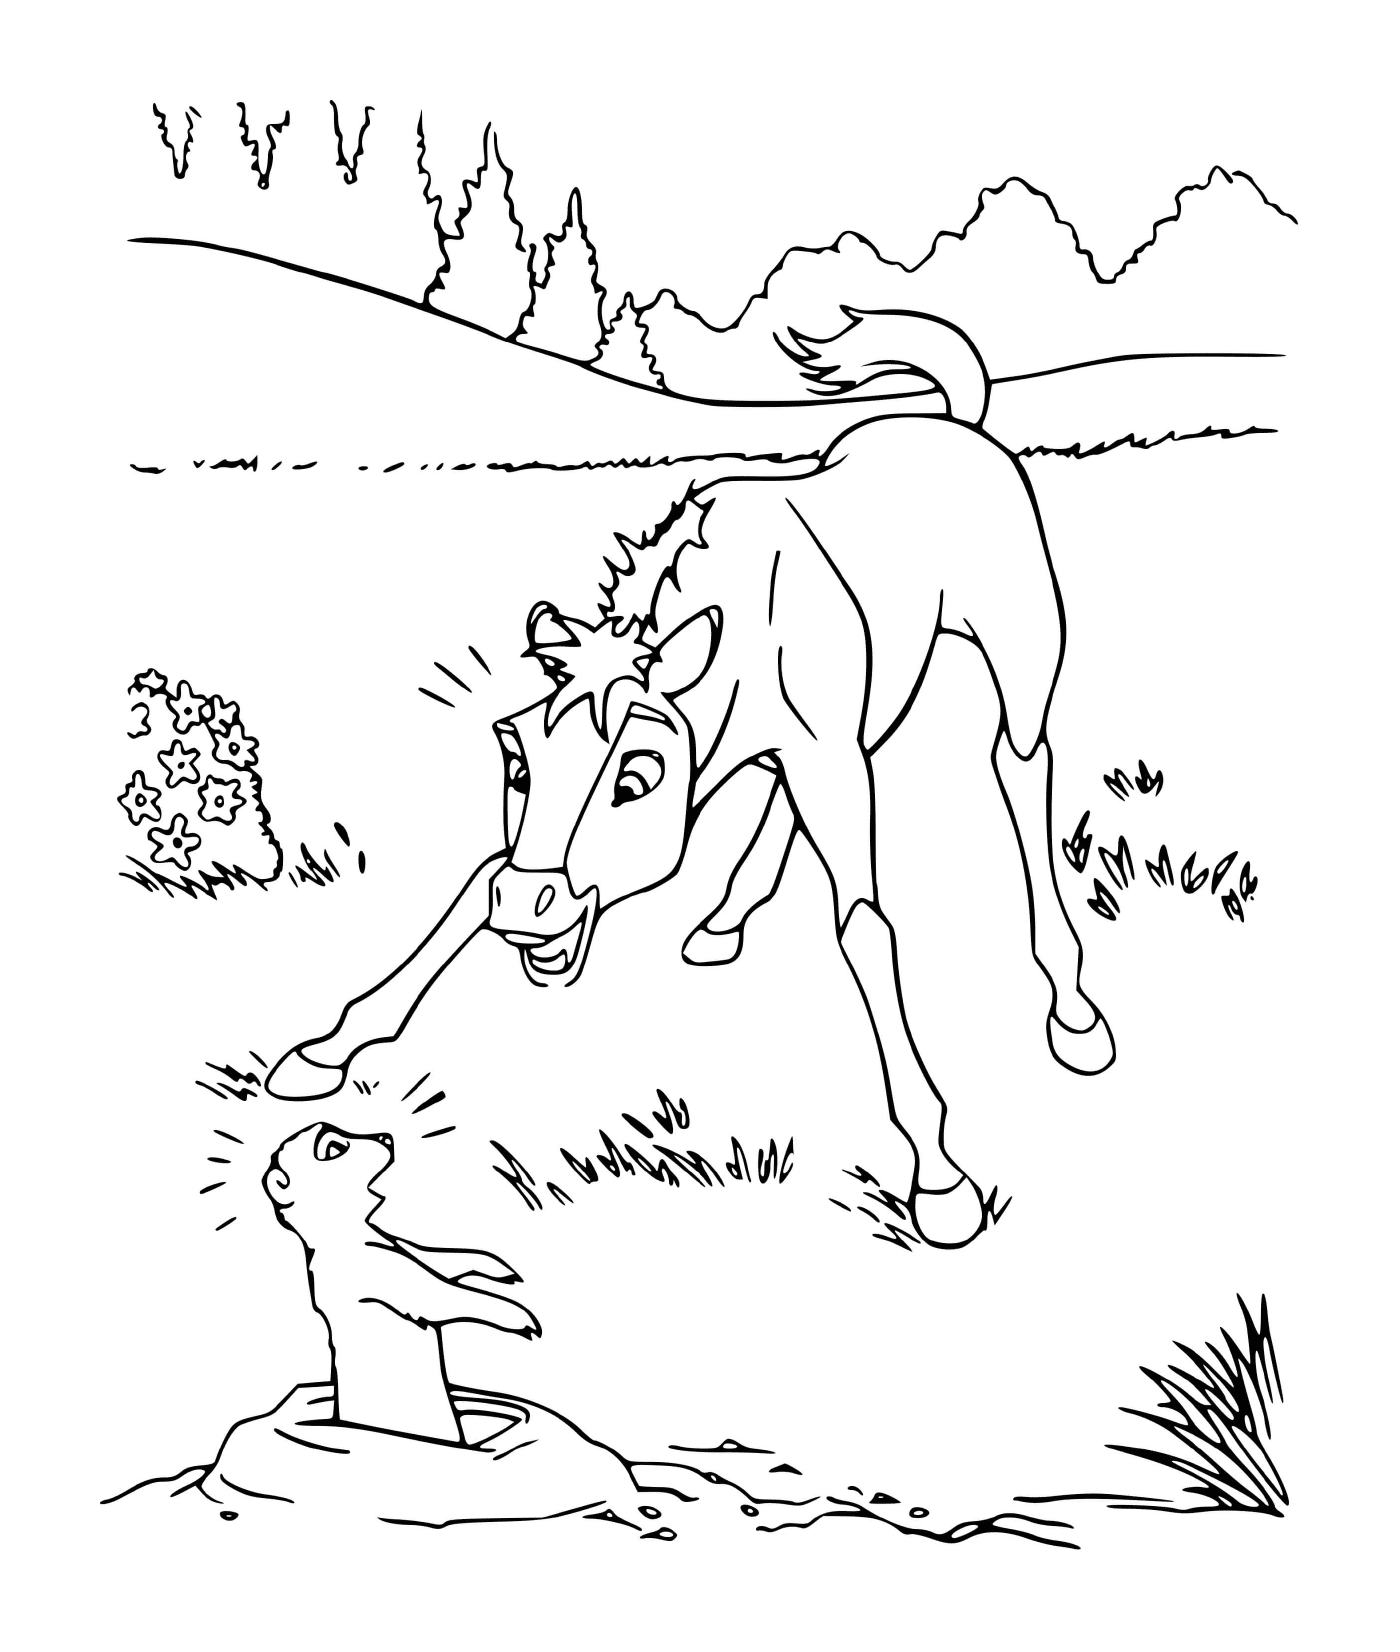  Spirit and a foal play 